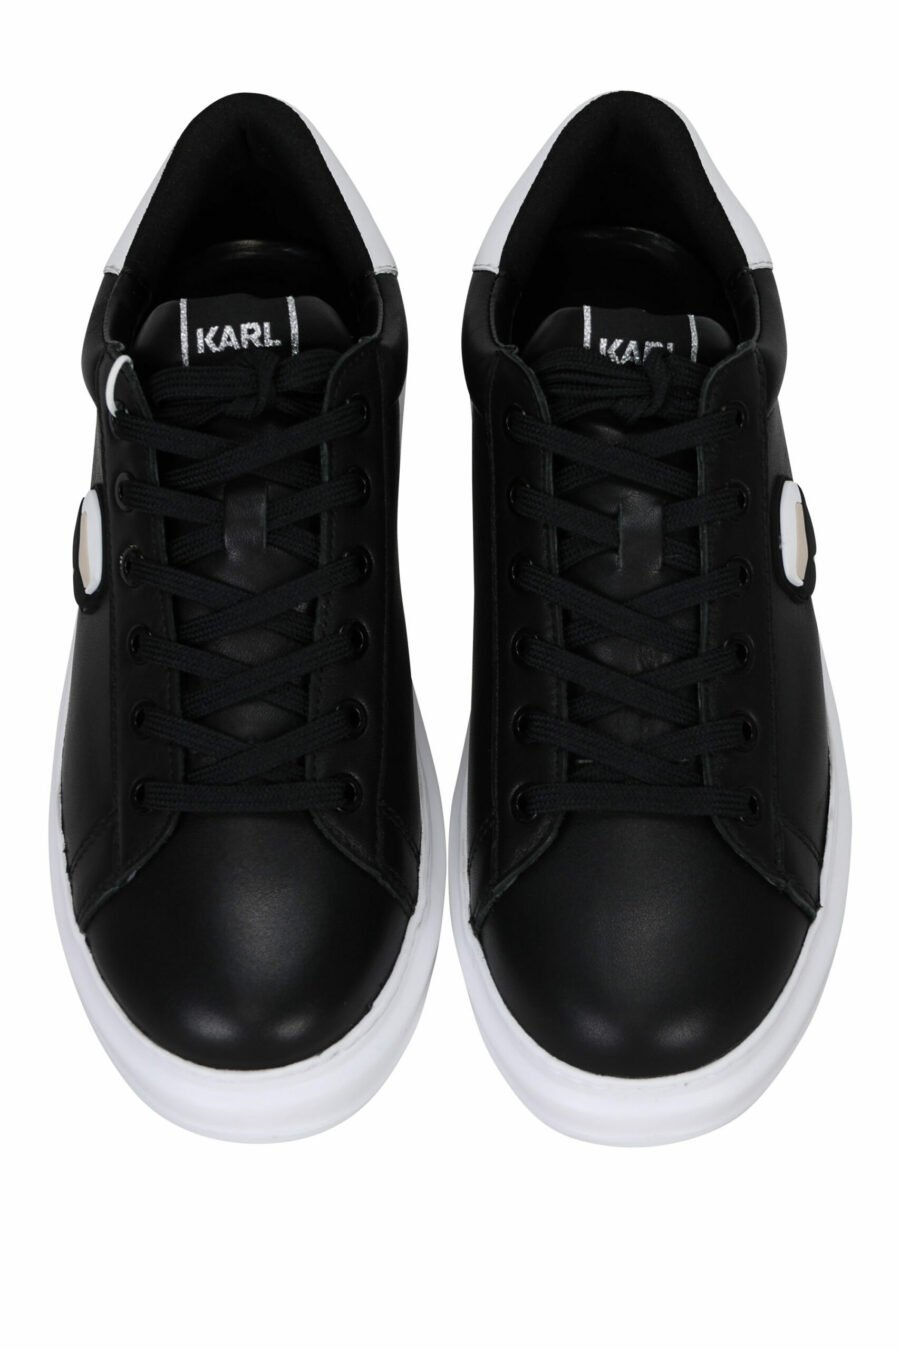 Black leather trainers "kapri mens" with rubber minilogo "karl" - 5059529362200 4 scaled